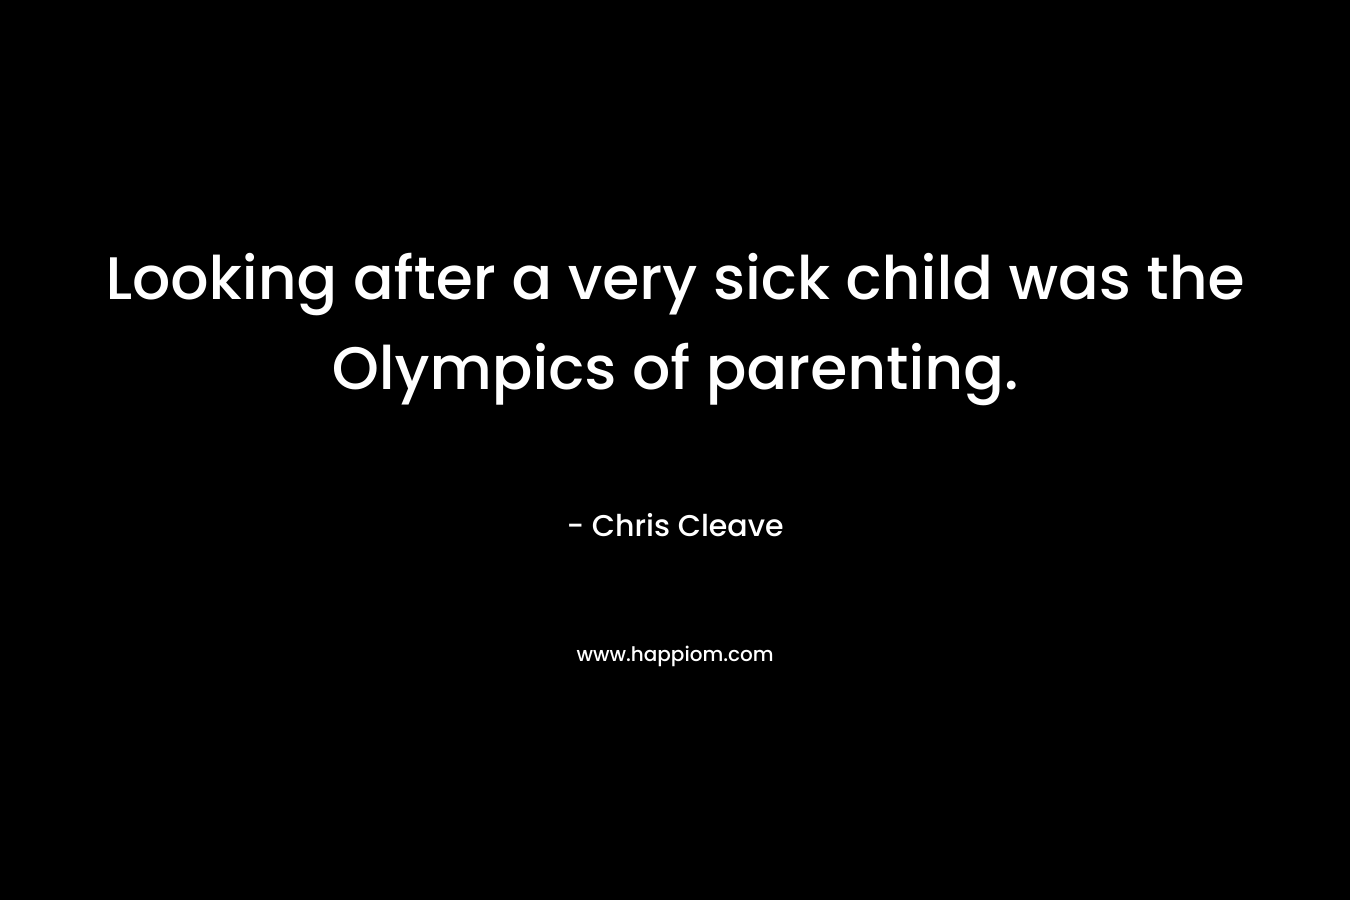 Looking after a very sick child was the Olympics of parenting.